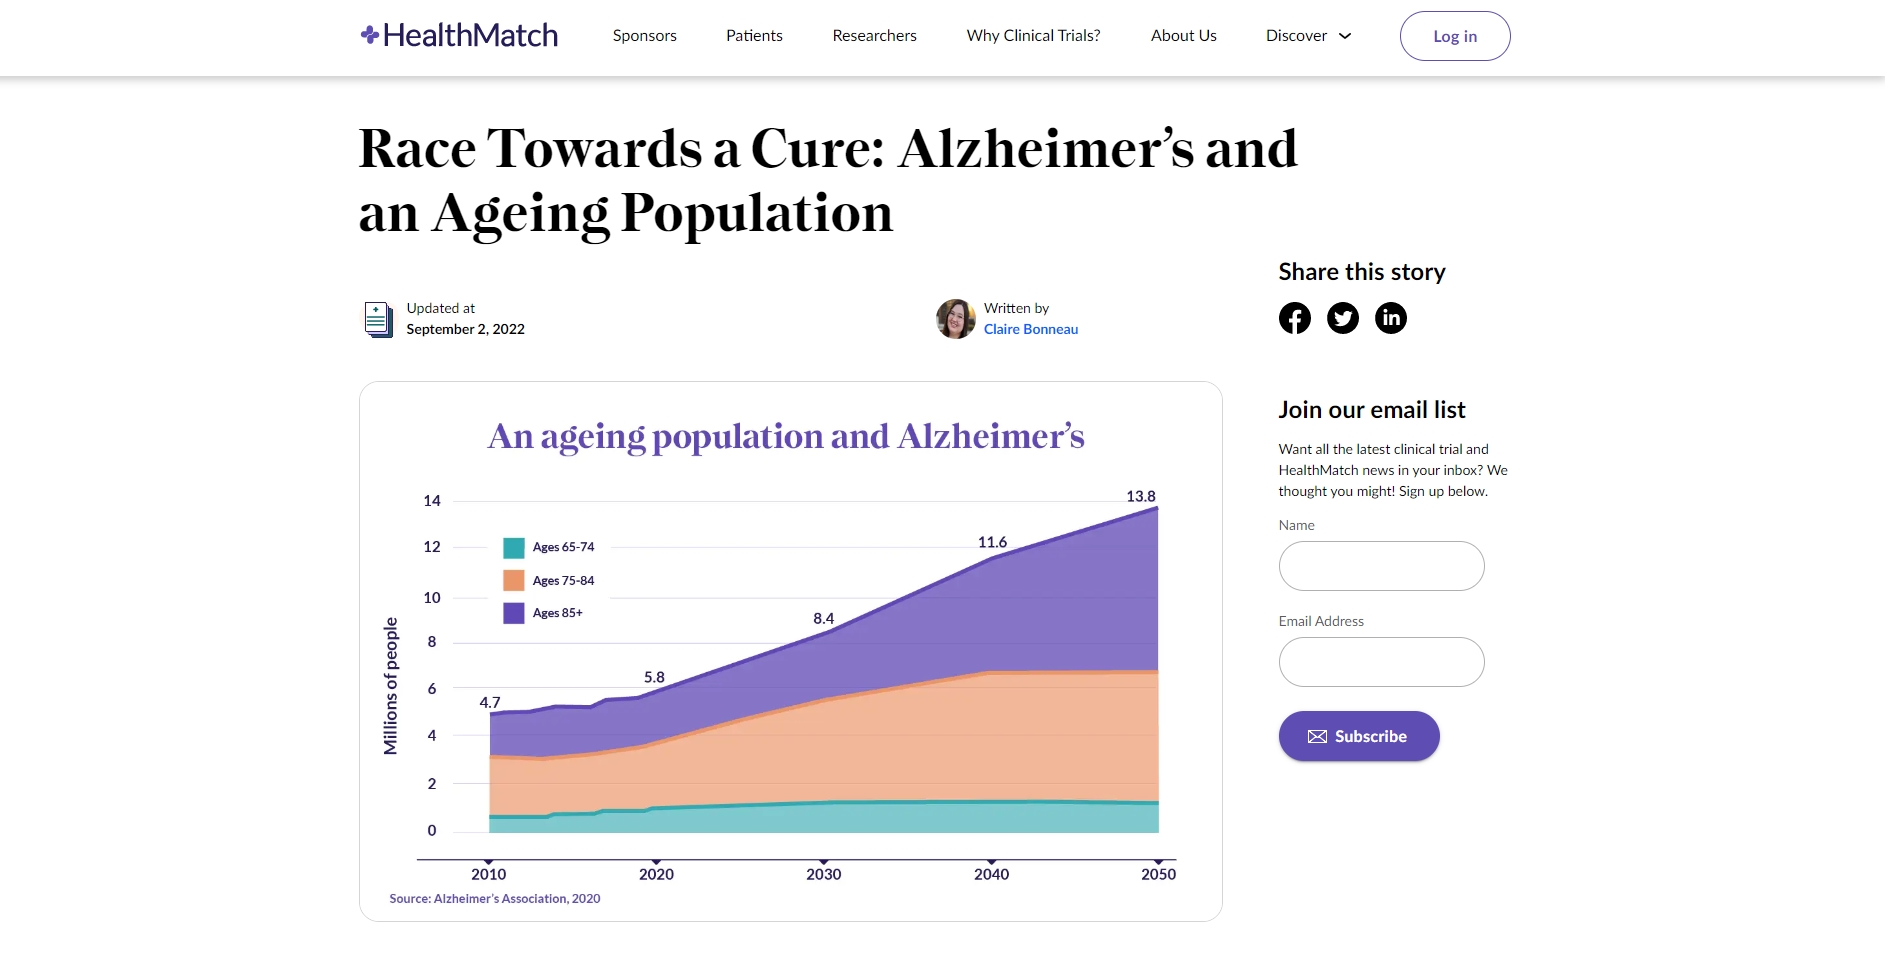 Race Towards a Cure: Alzheimer's and an Ageing Population